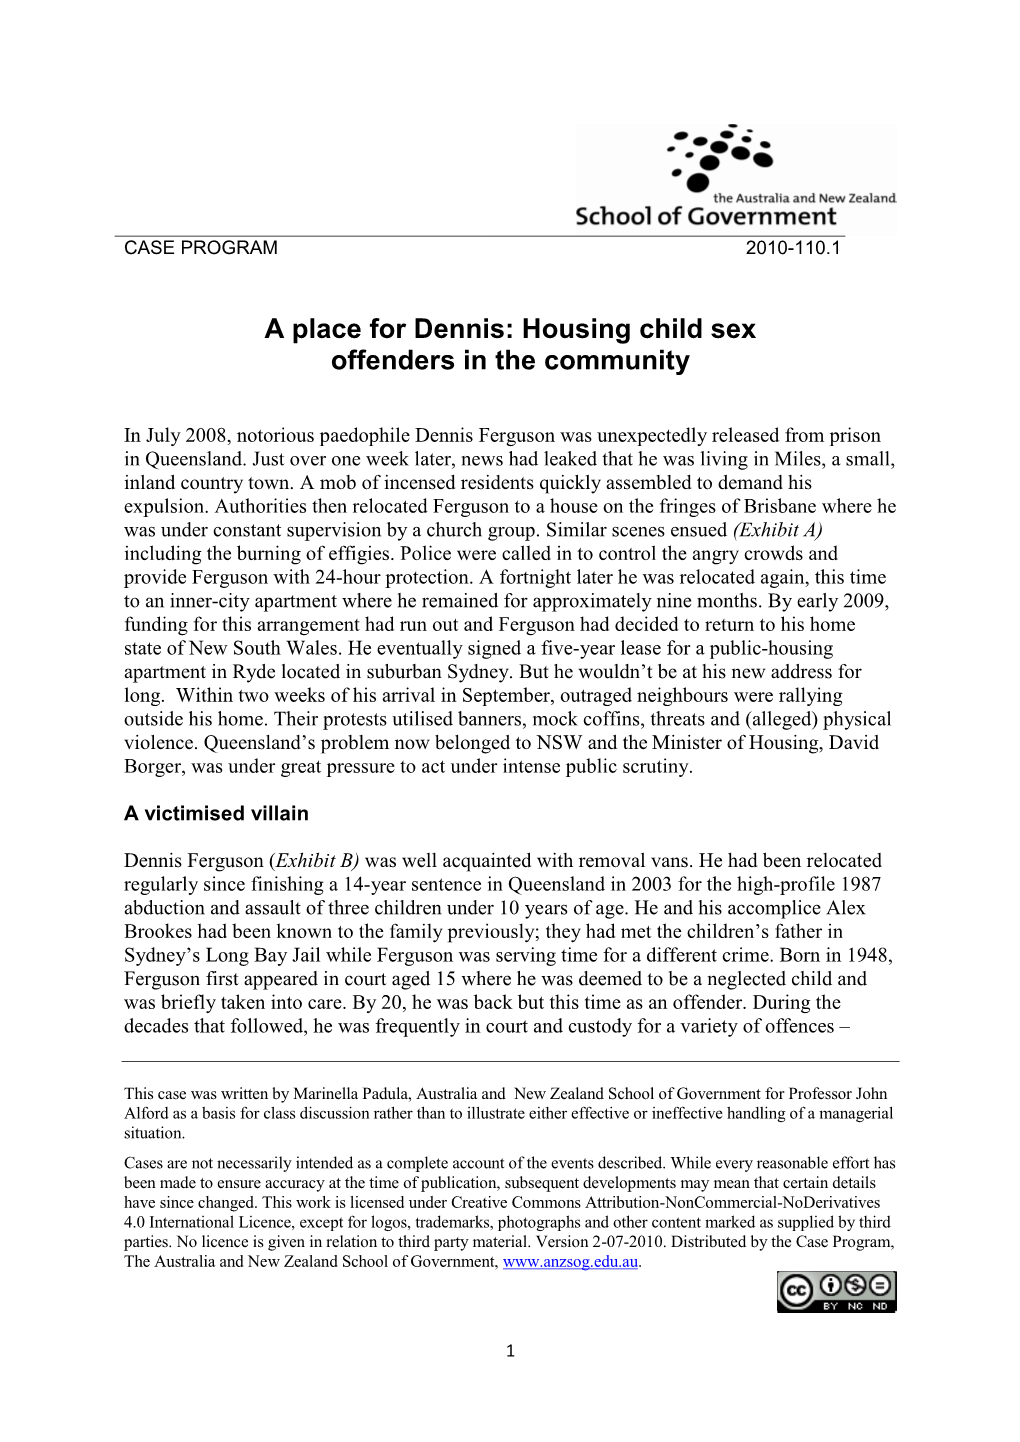 Housing Child Sex Offenders in the Community